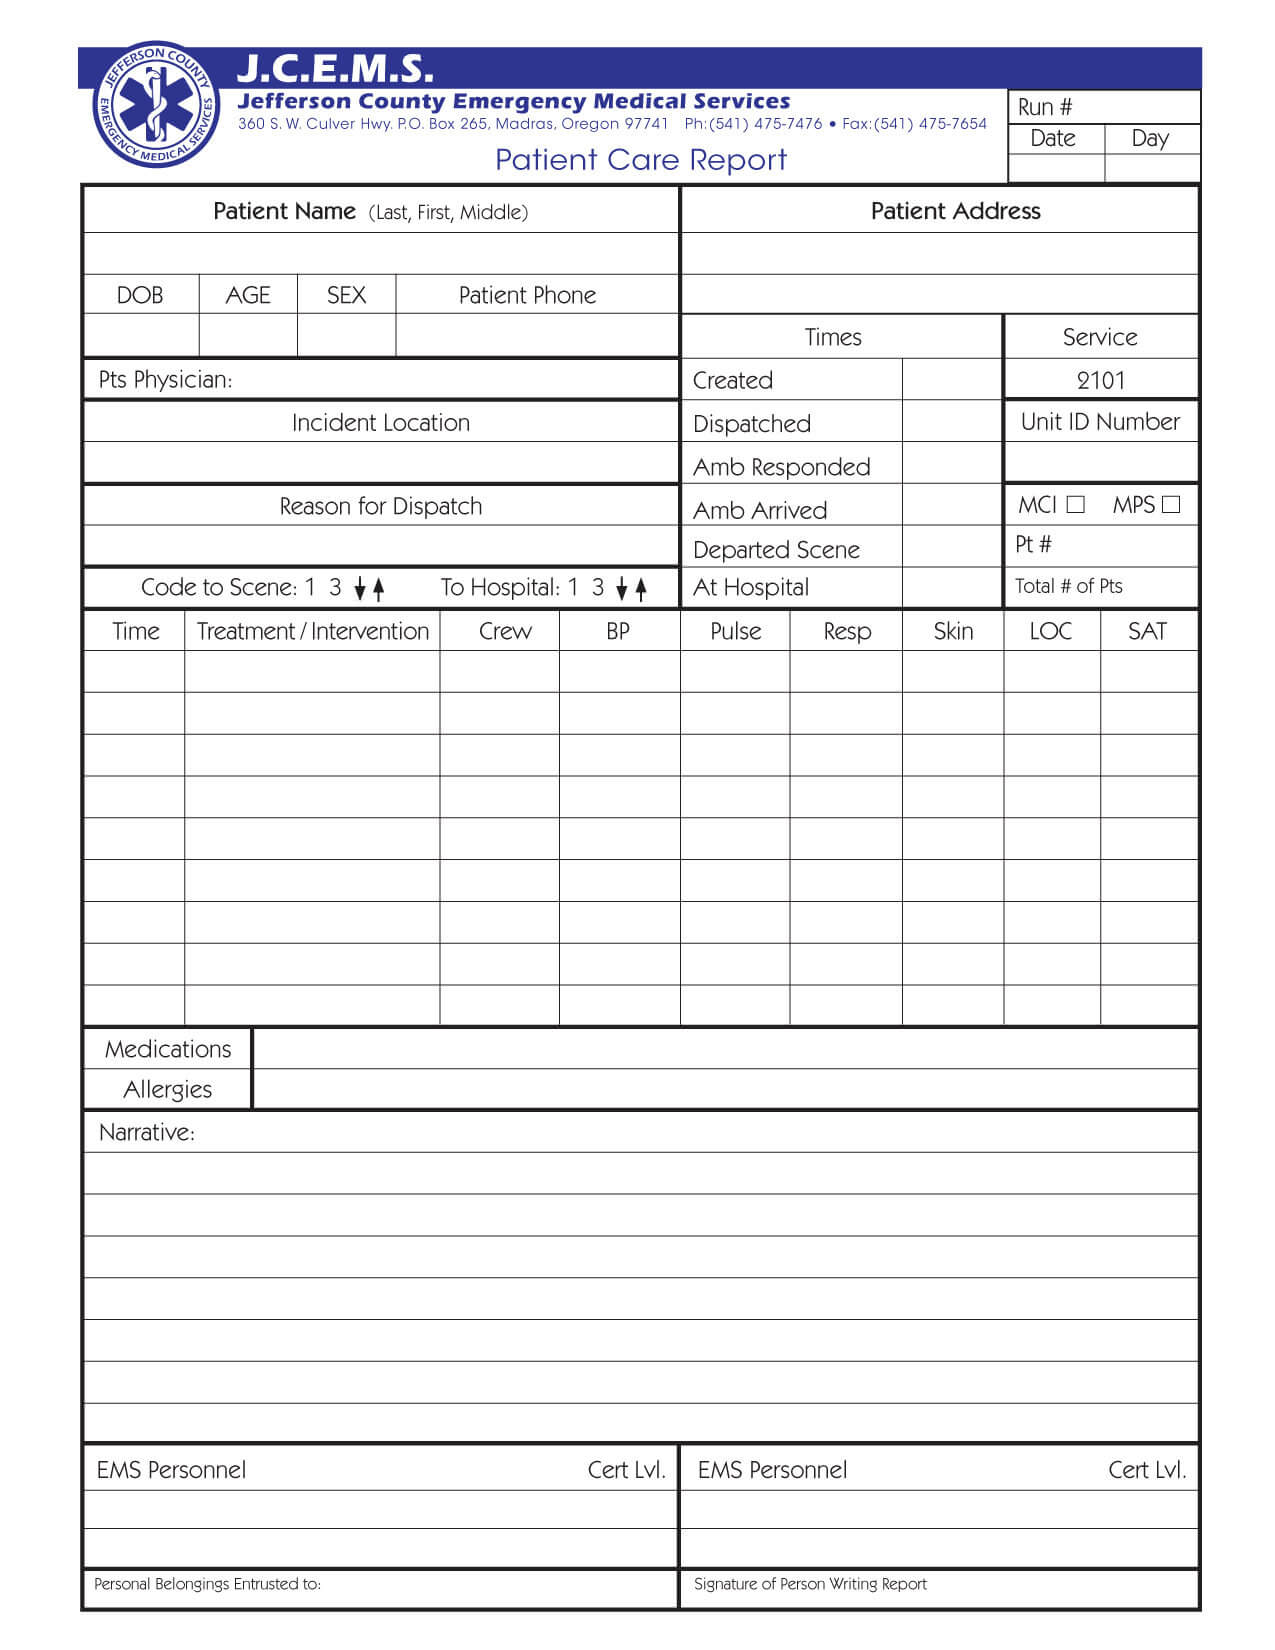 Patient Care Report Template Word Emt Example Ems Narrative With Patient Care Report Template